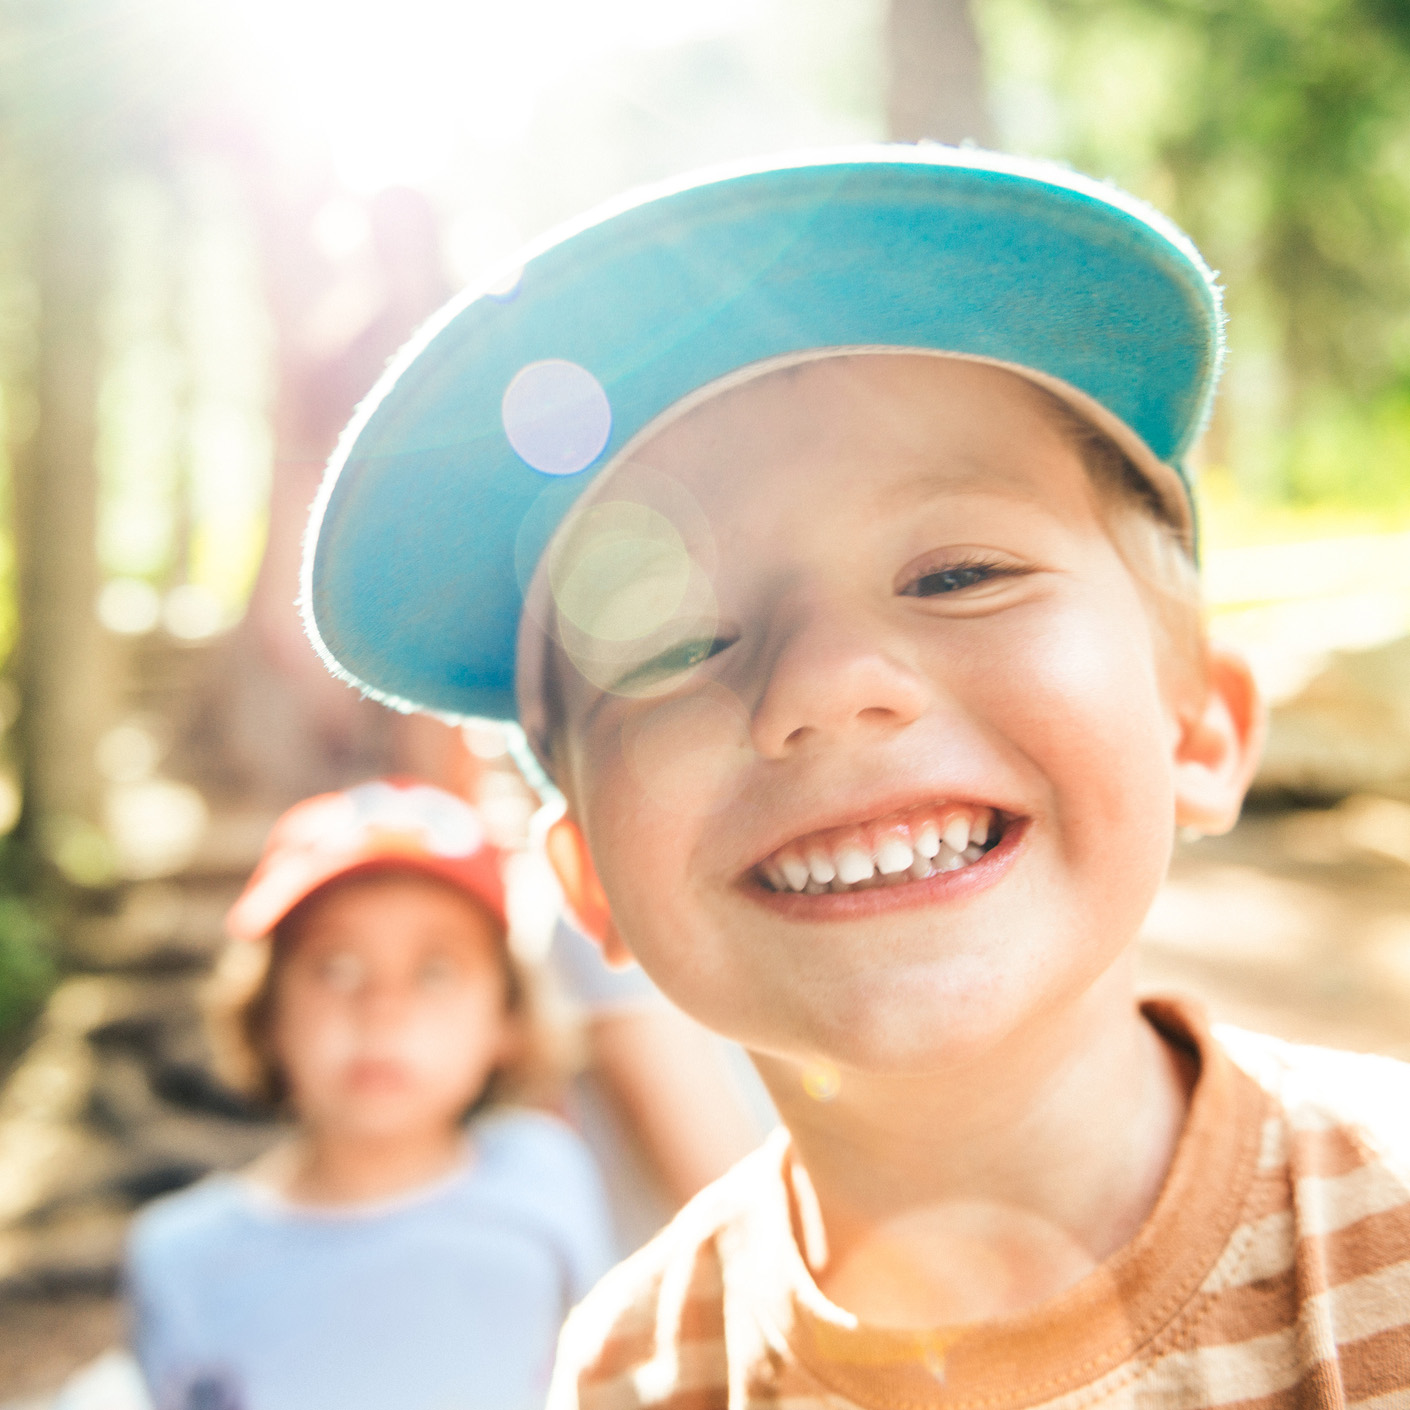 Young boy in the forest wearing a hat smiling